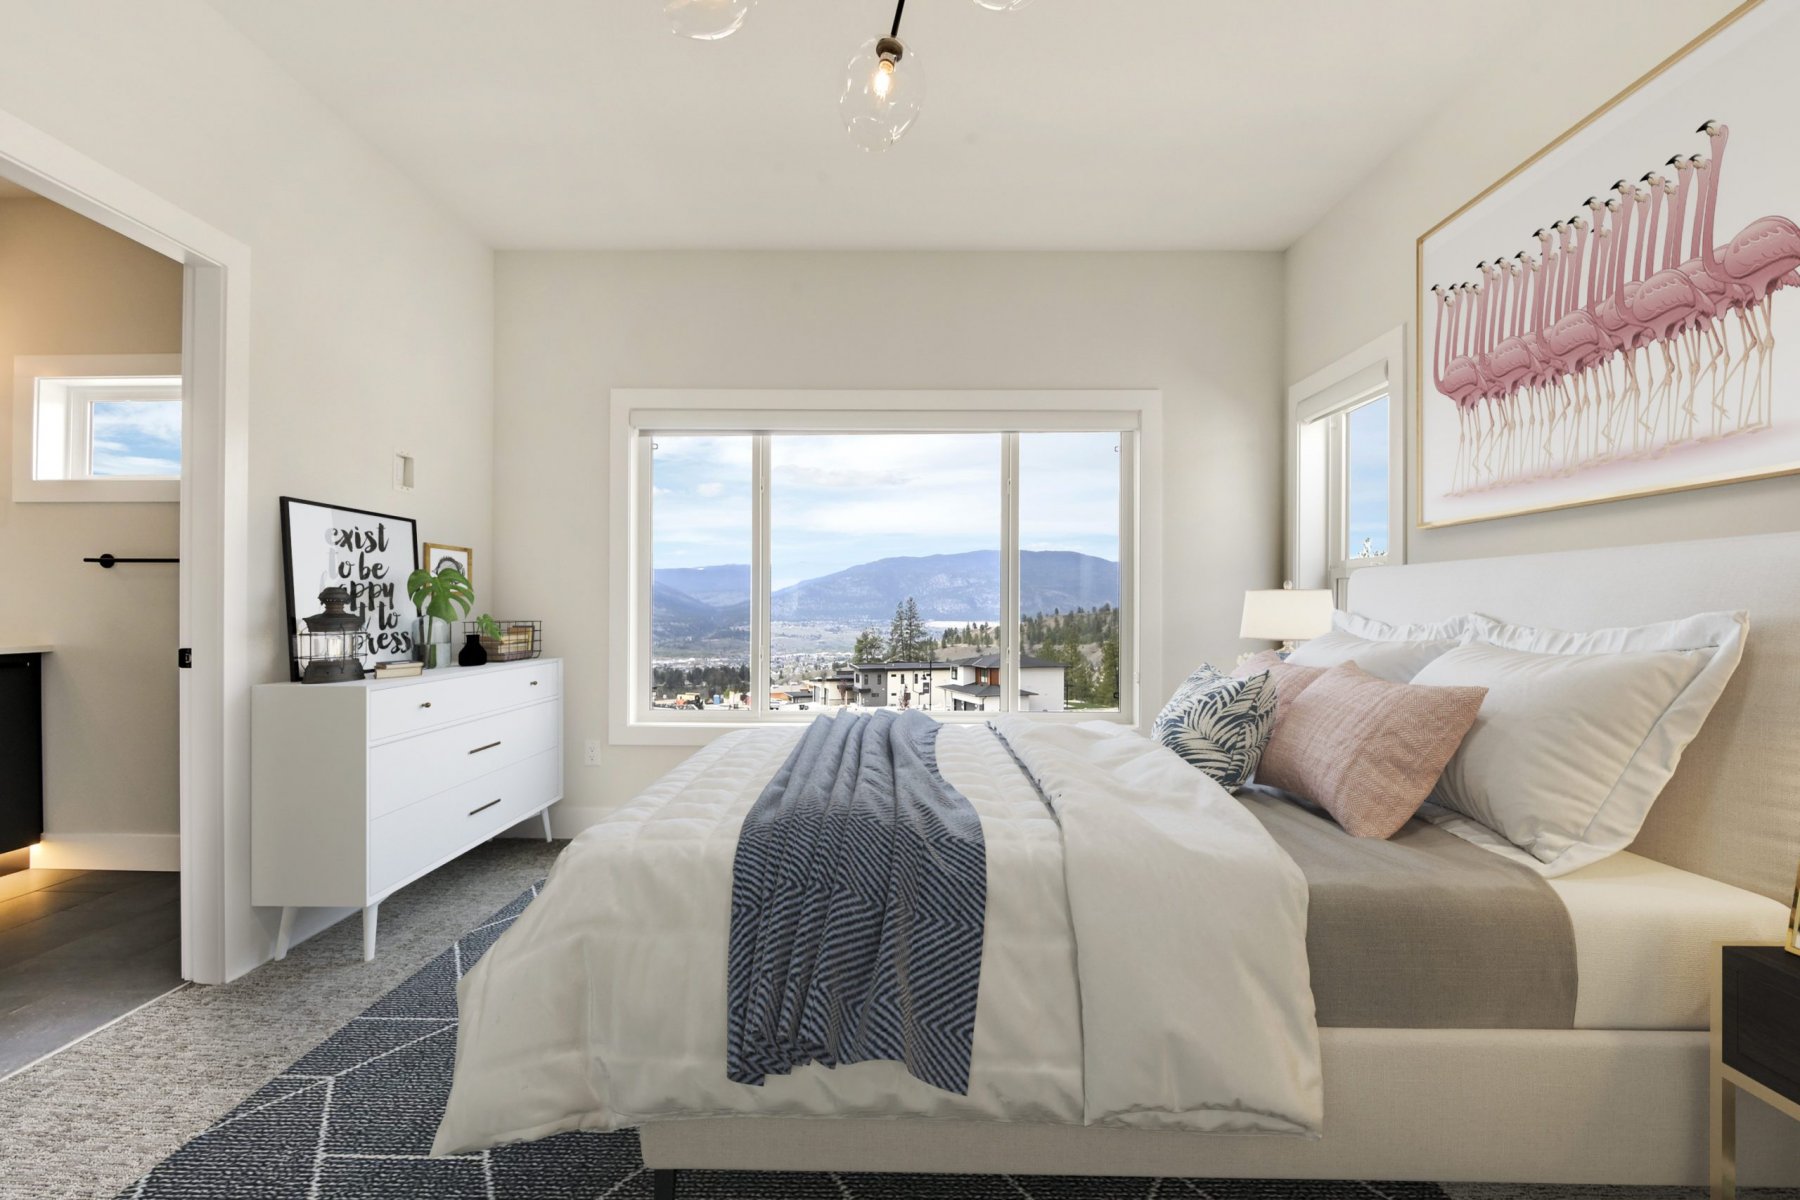 harmony_homes_the_ridge_multi_family_project_bed_room_view_gallery_image_10